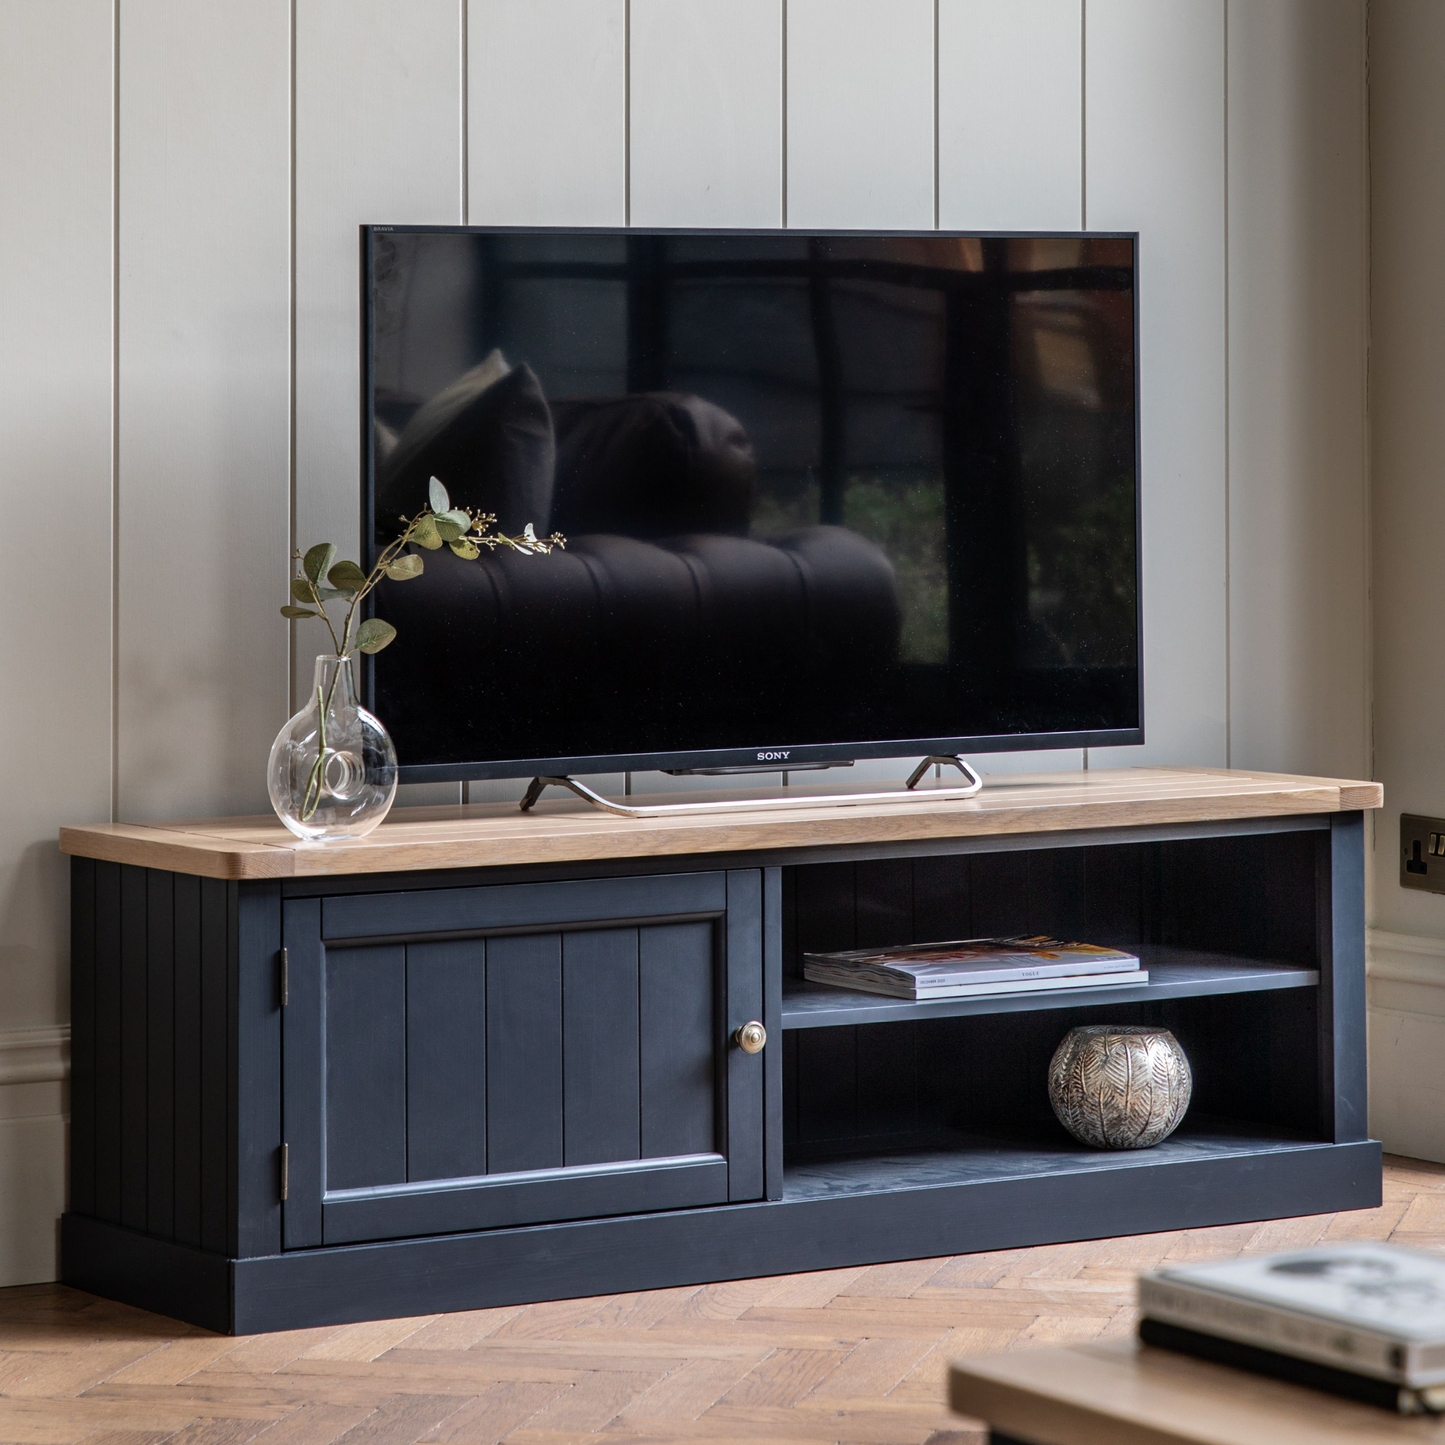 A Buckland Media Unit in Meteor from Kikiathome.co.uk, blending interior decor and home furniture with a TV on top.